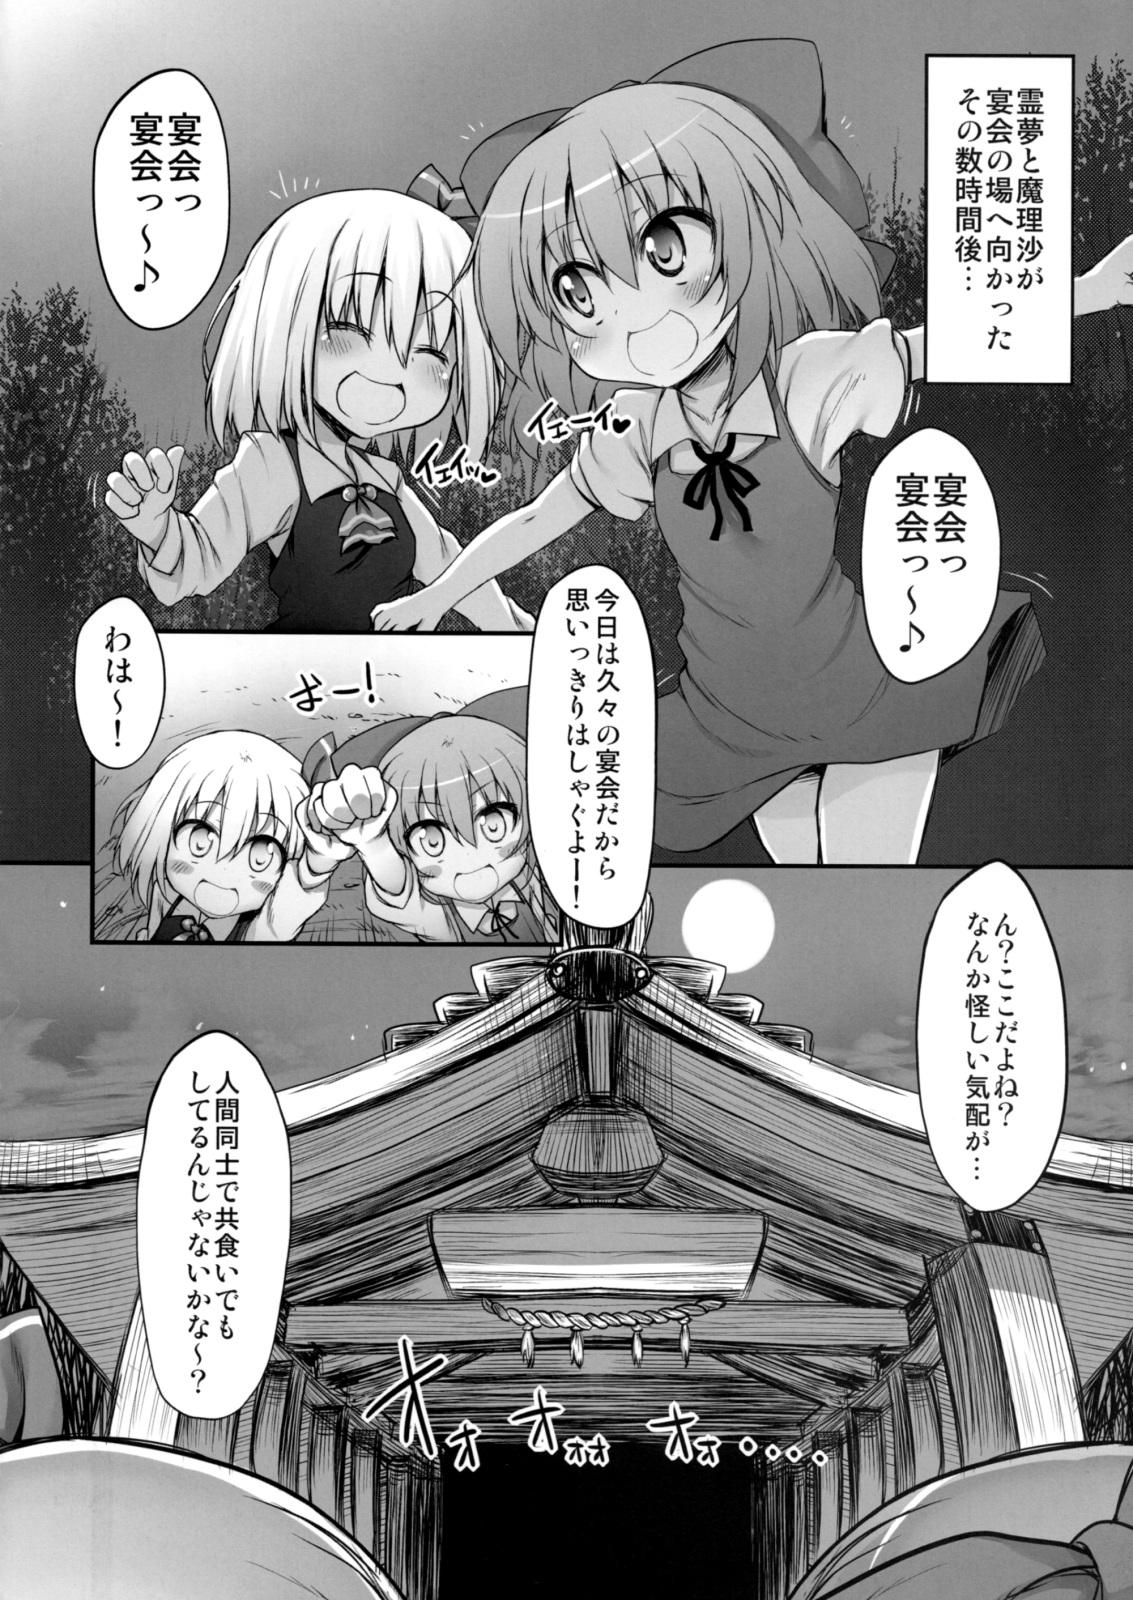 Submissive Gensoukyou no Utage - Touhou project Whatsapp - Page 3